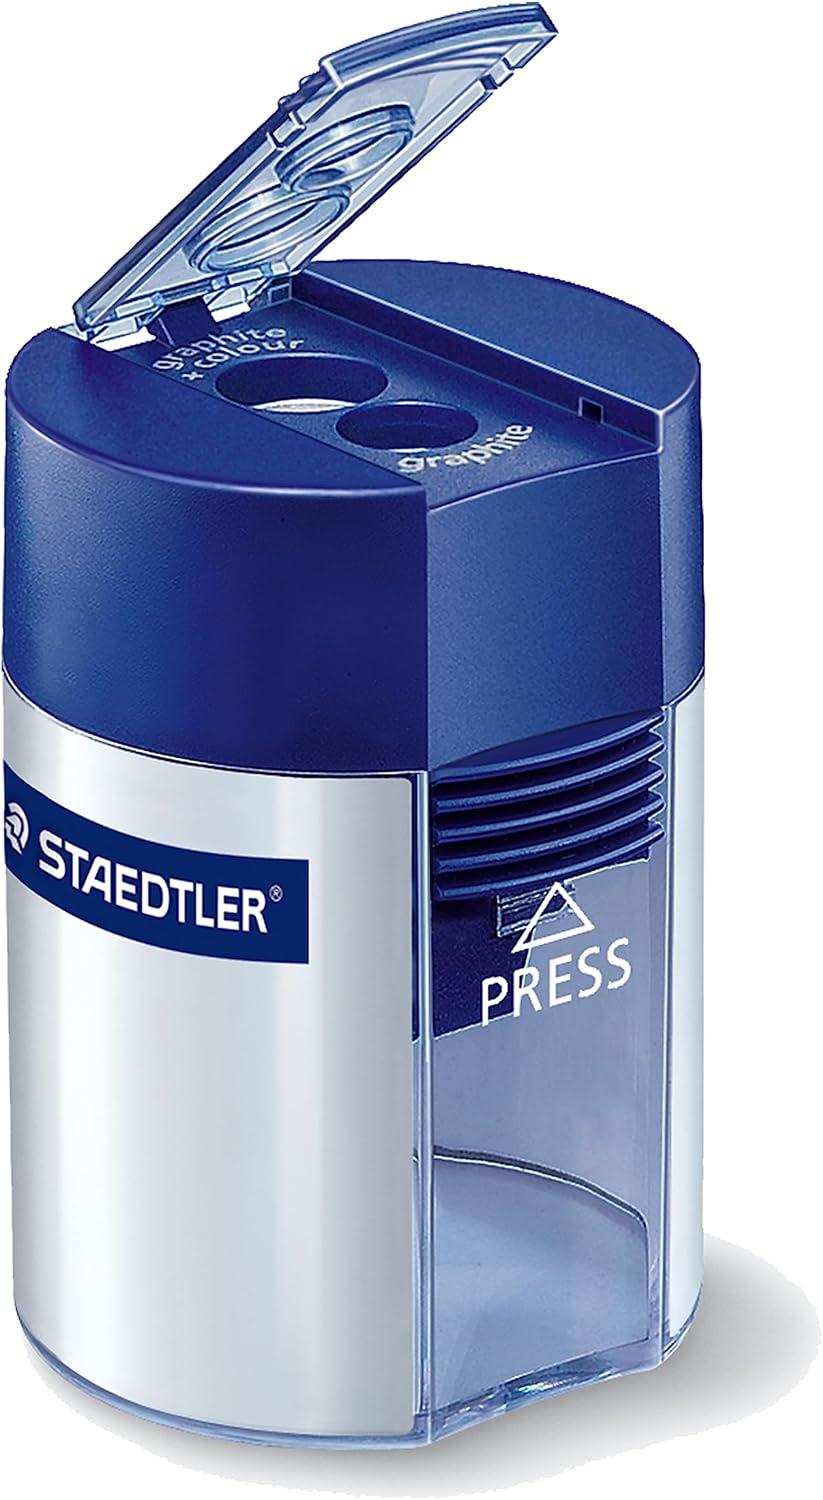 staedtler double hole pencil sharpener two holes for standard pencils large colored pencils and makeup